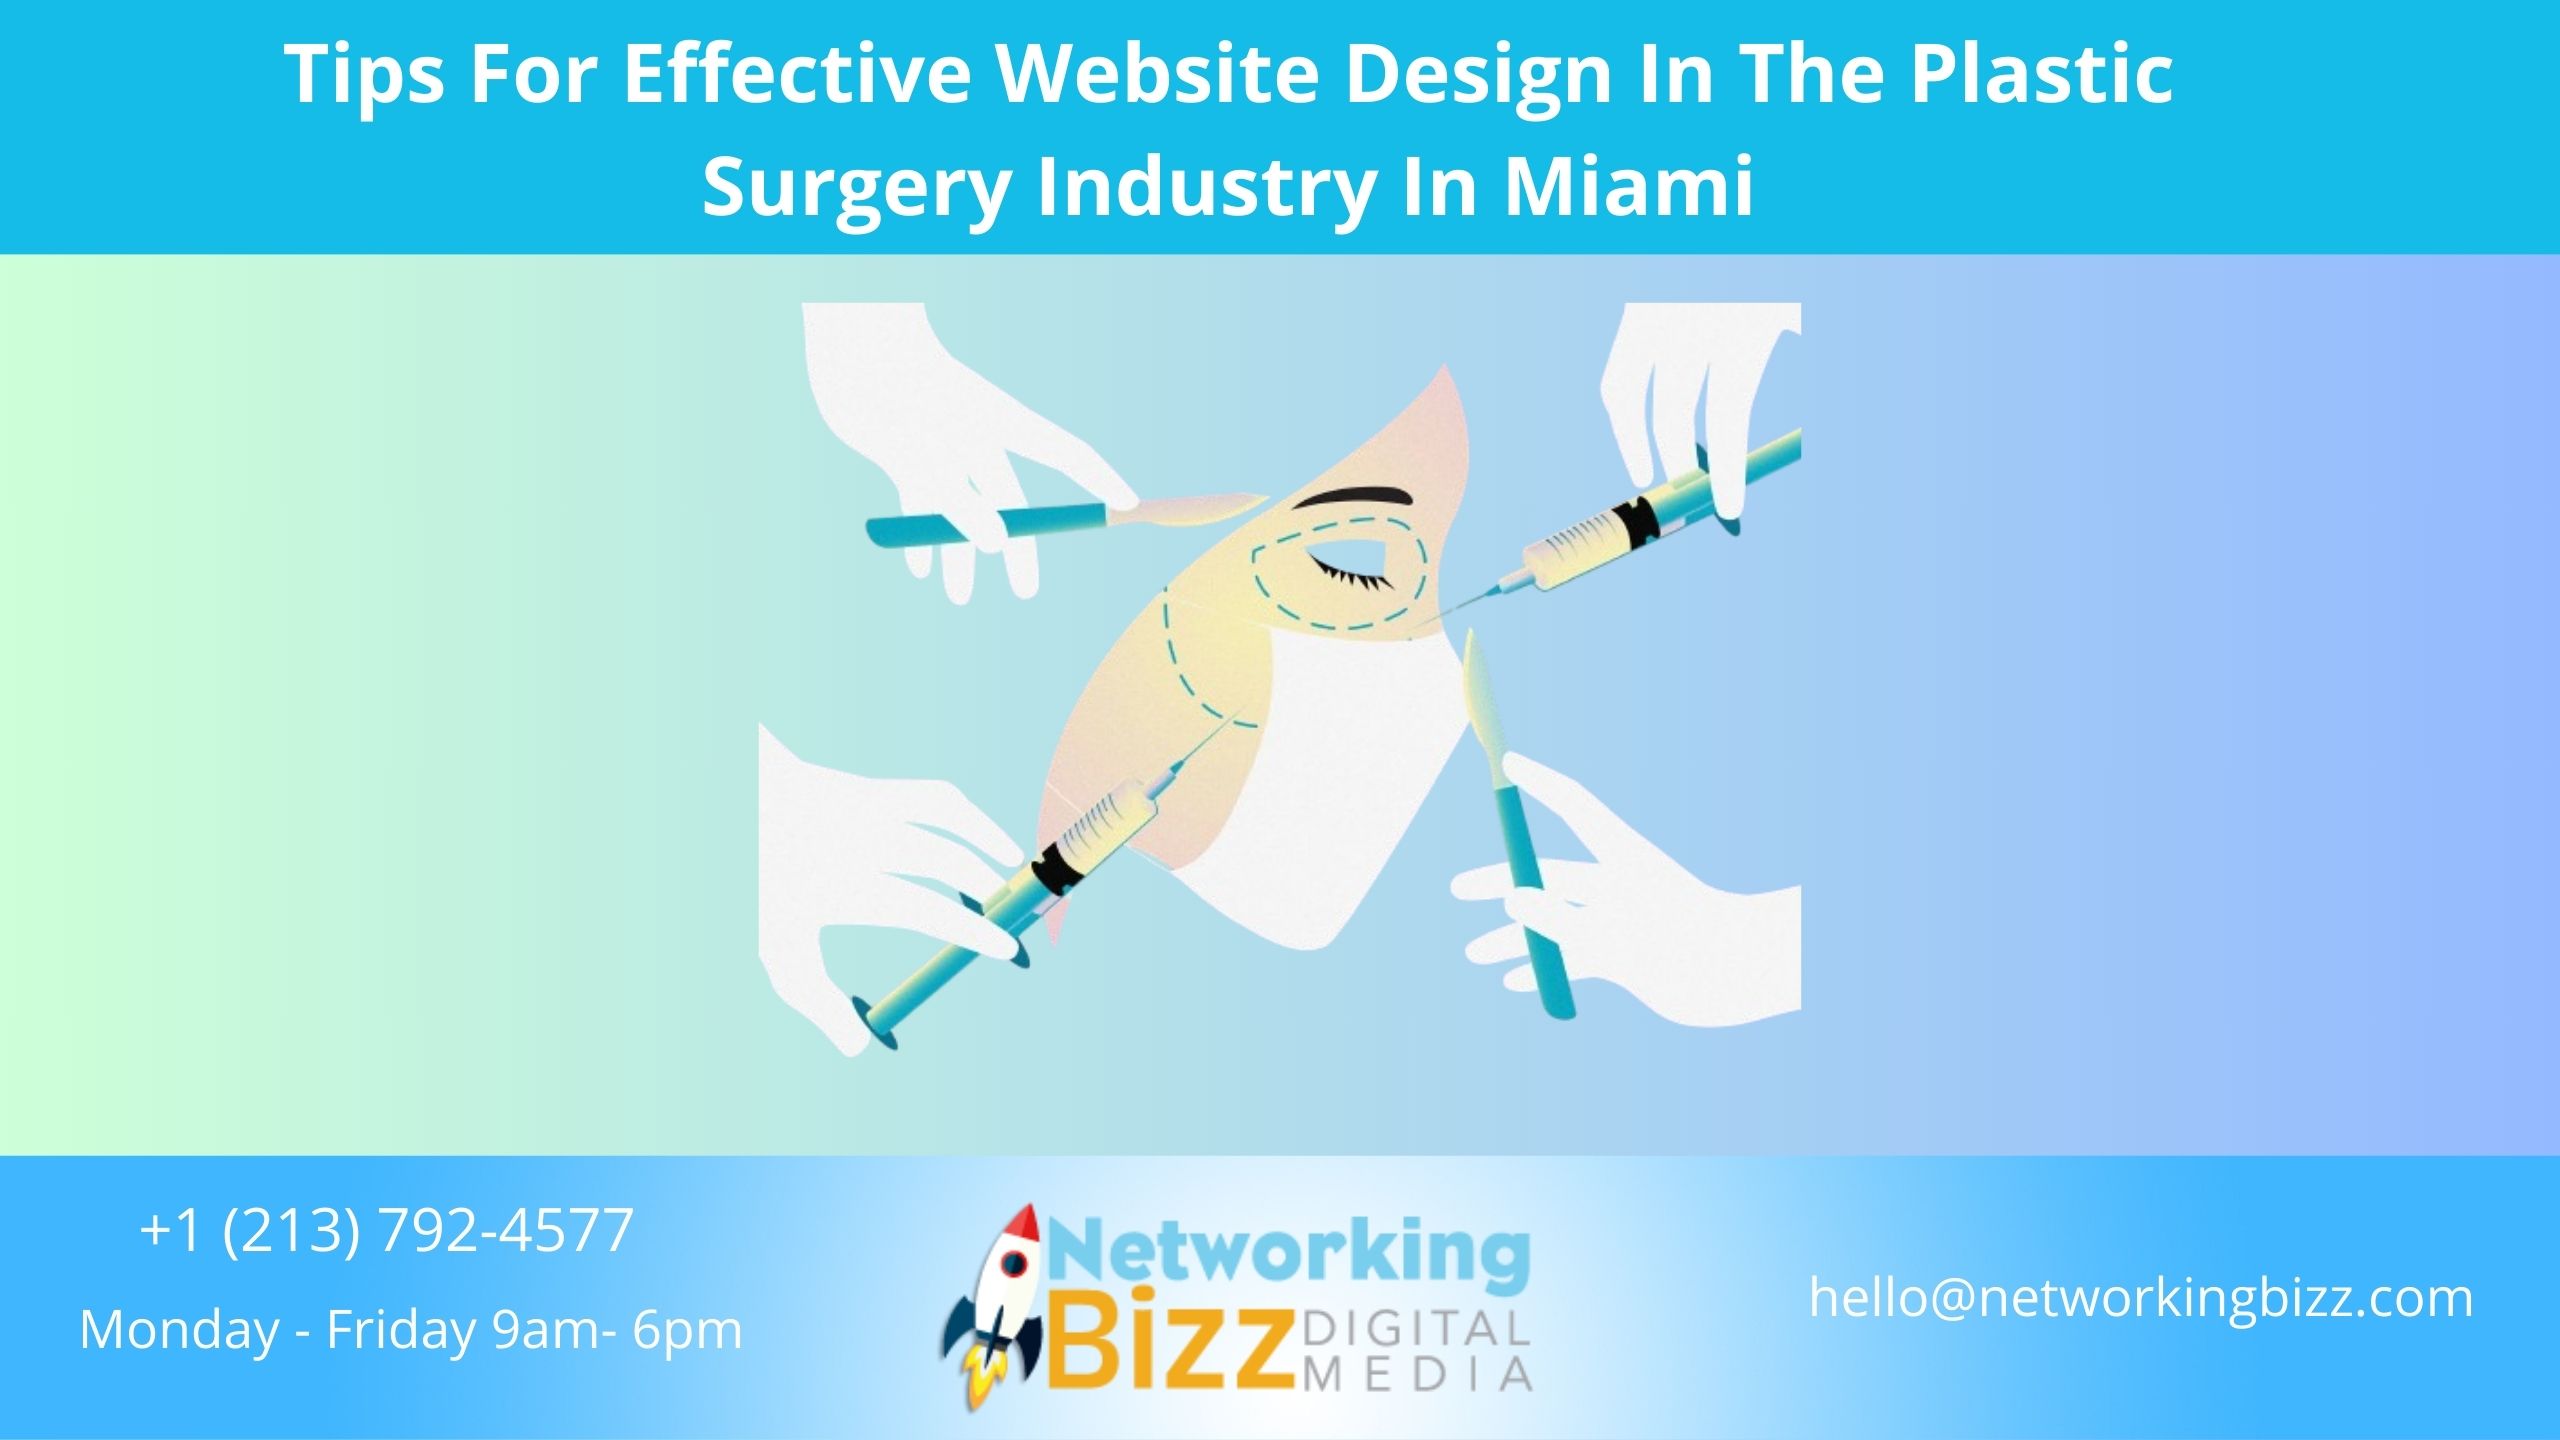 Tips For Effective Website Design In The Plastic Surgery Industry In Miami